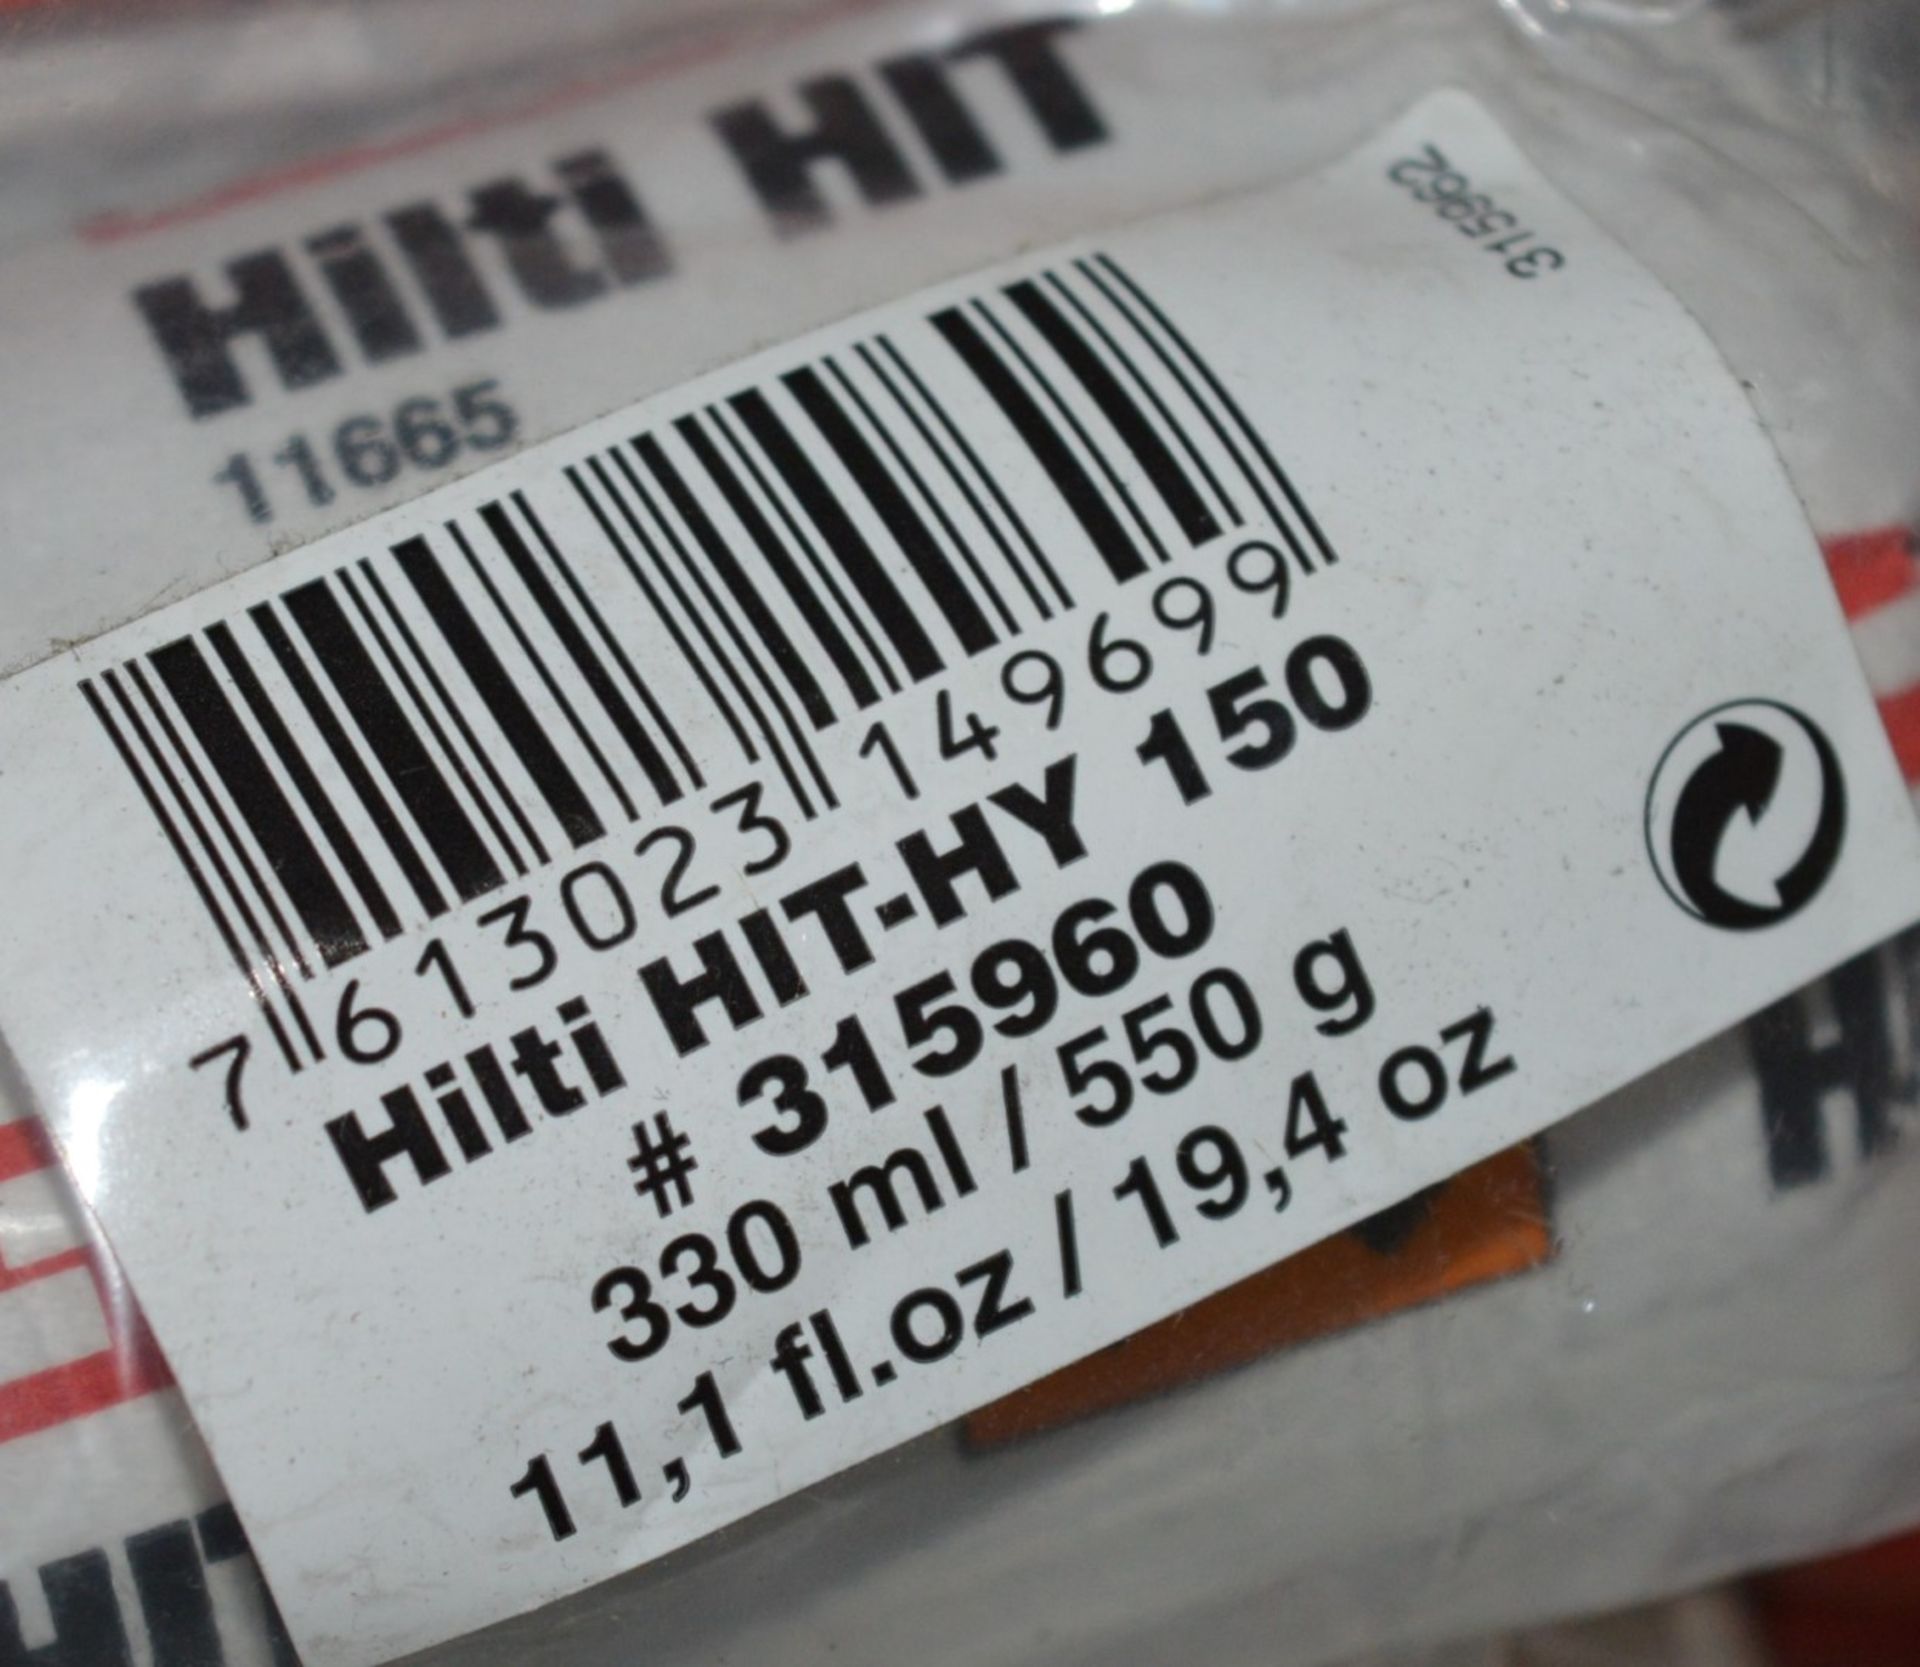 15 x Hilti HIT-HY 150 Adhesive Anchor - 330ml - Product Code 315960 - Unused Packs - CL300 - Ref - Image 4 of 4